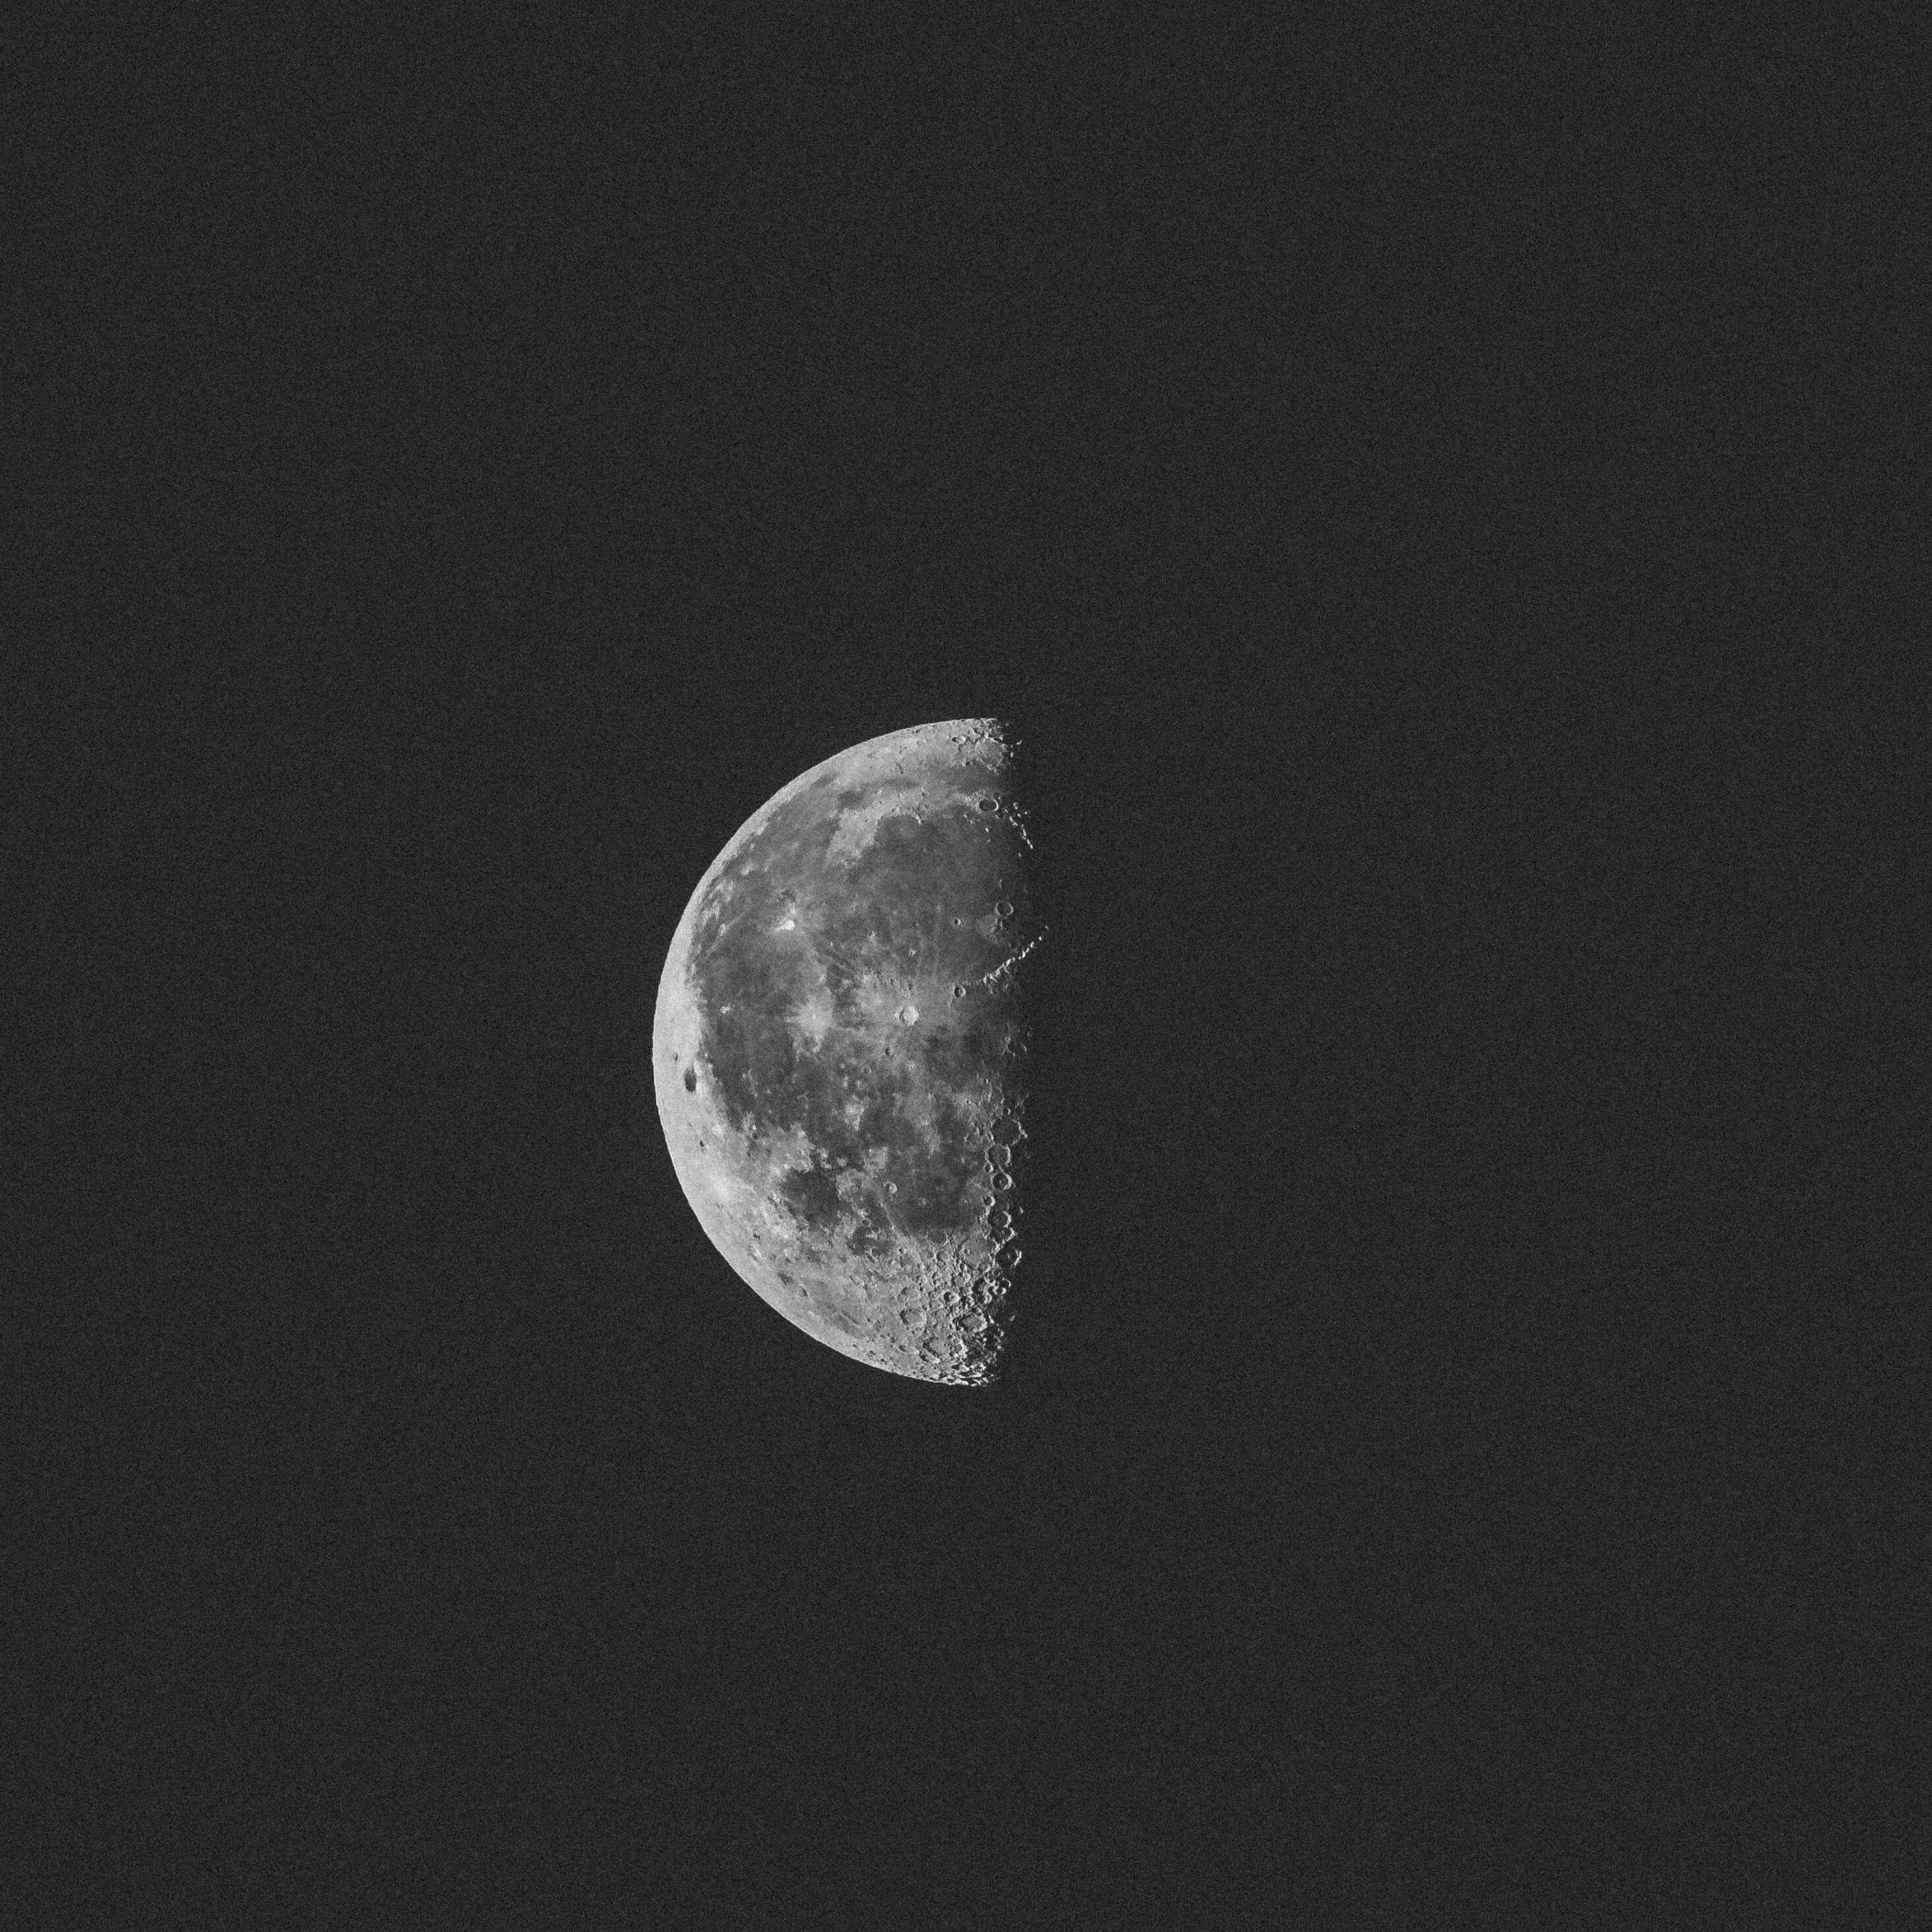 A black and white photo of the moon - Moon